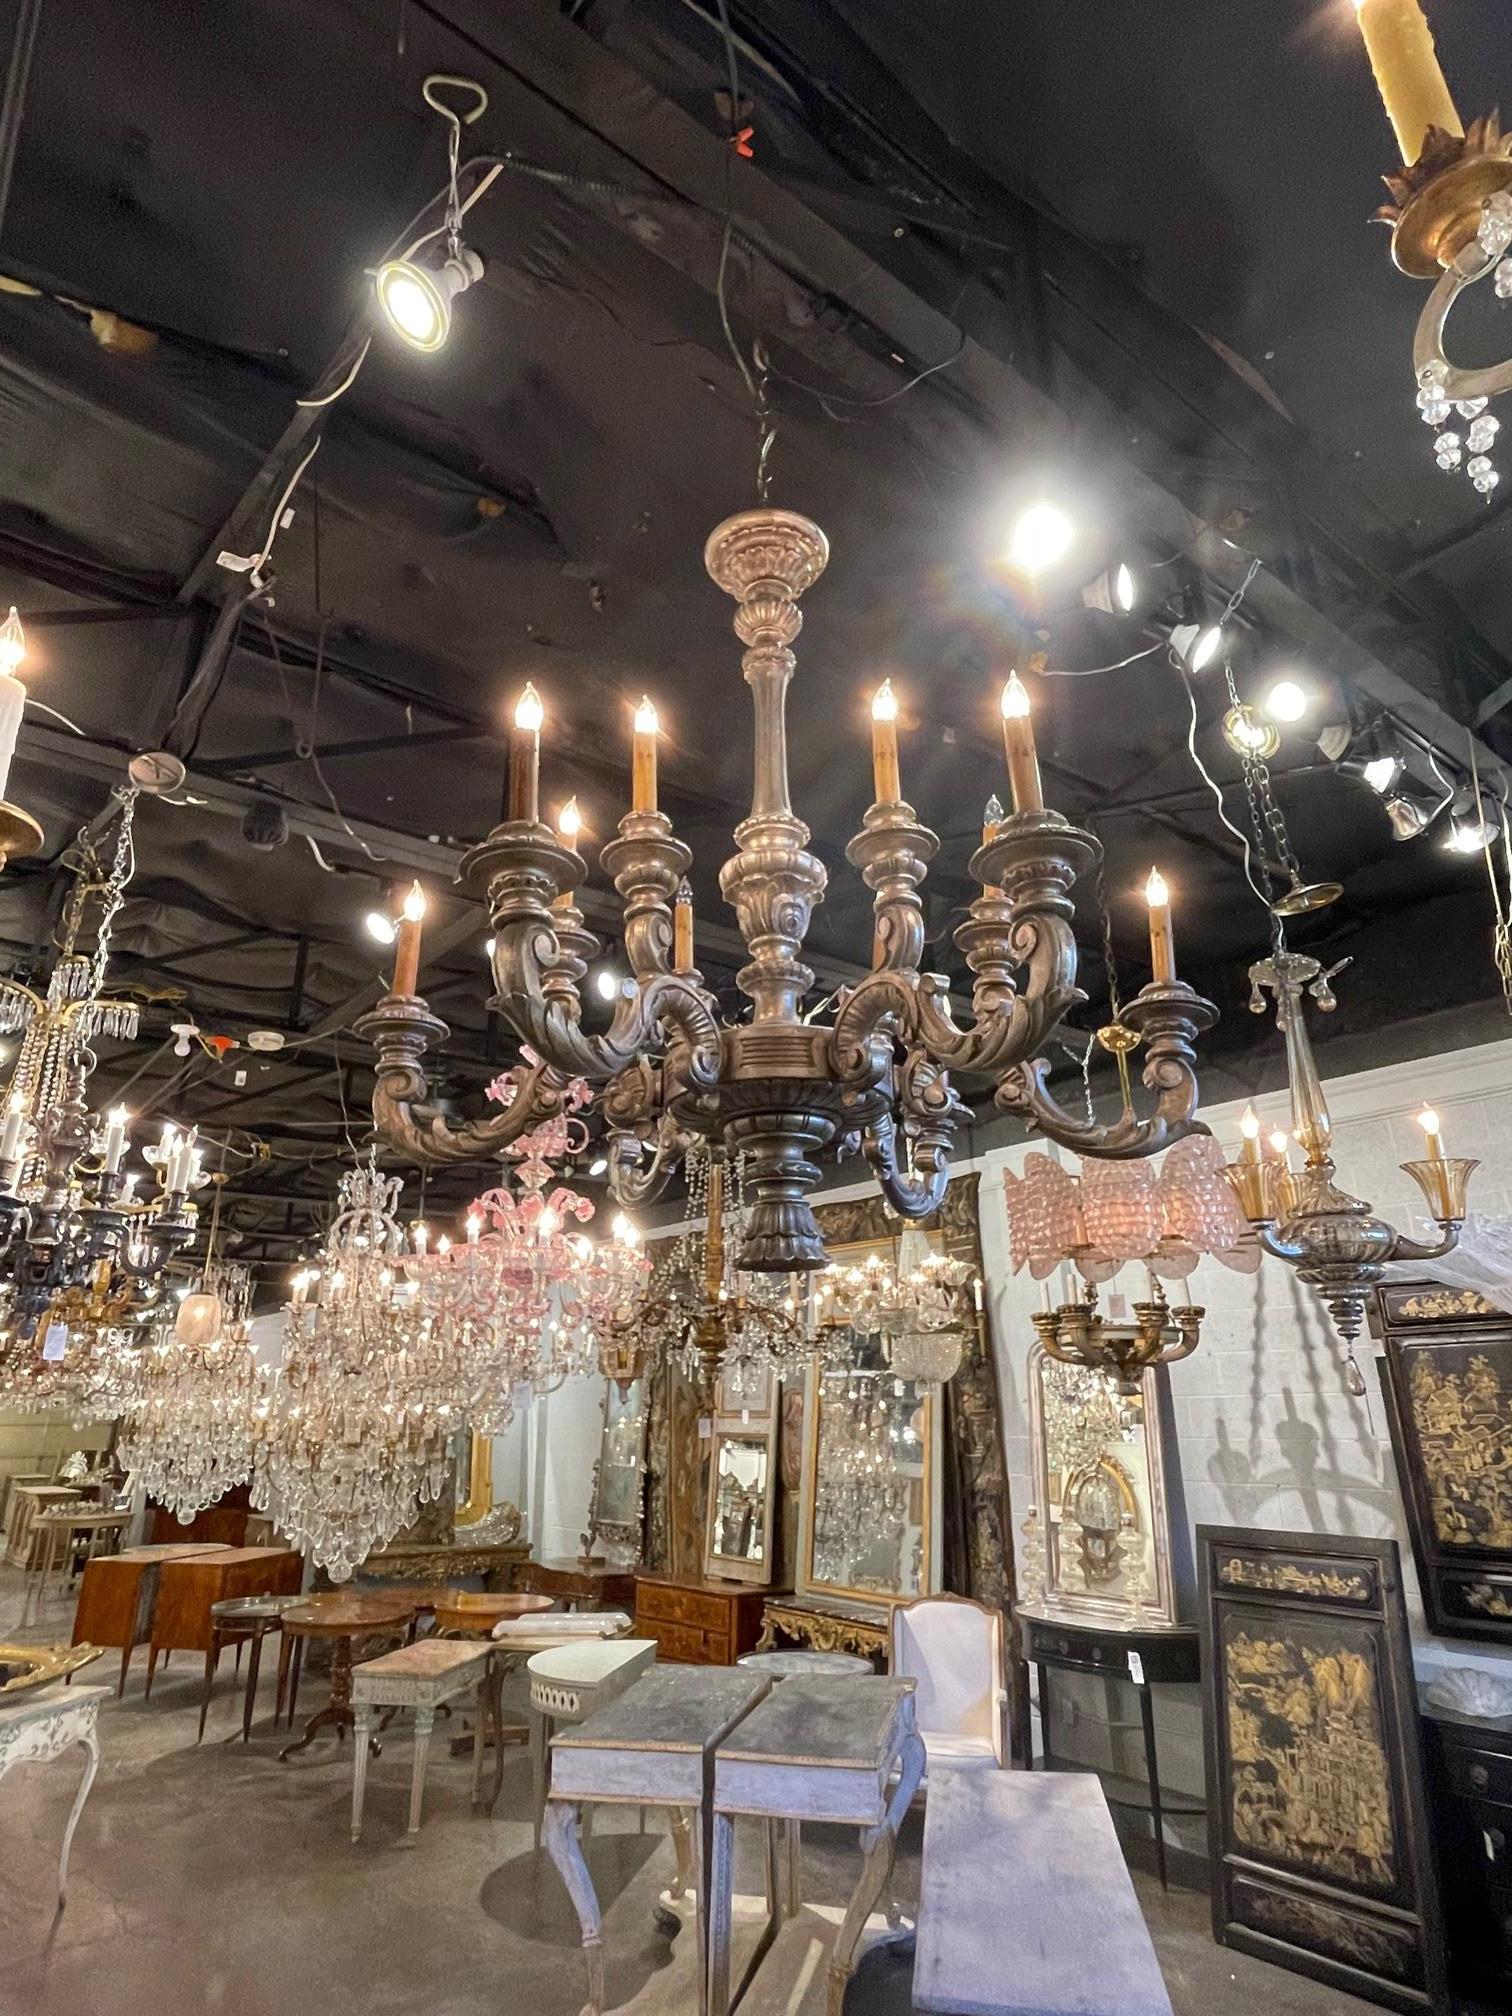 Italian carved and silver gilt wood 12-light chandelier, Circa 1920. The chandelier has been professionally re-wired, cleaned and is ready to hang. Includes matching chain and canopy. Sure to make a statement.